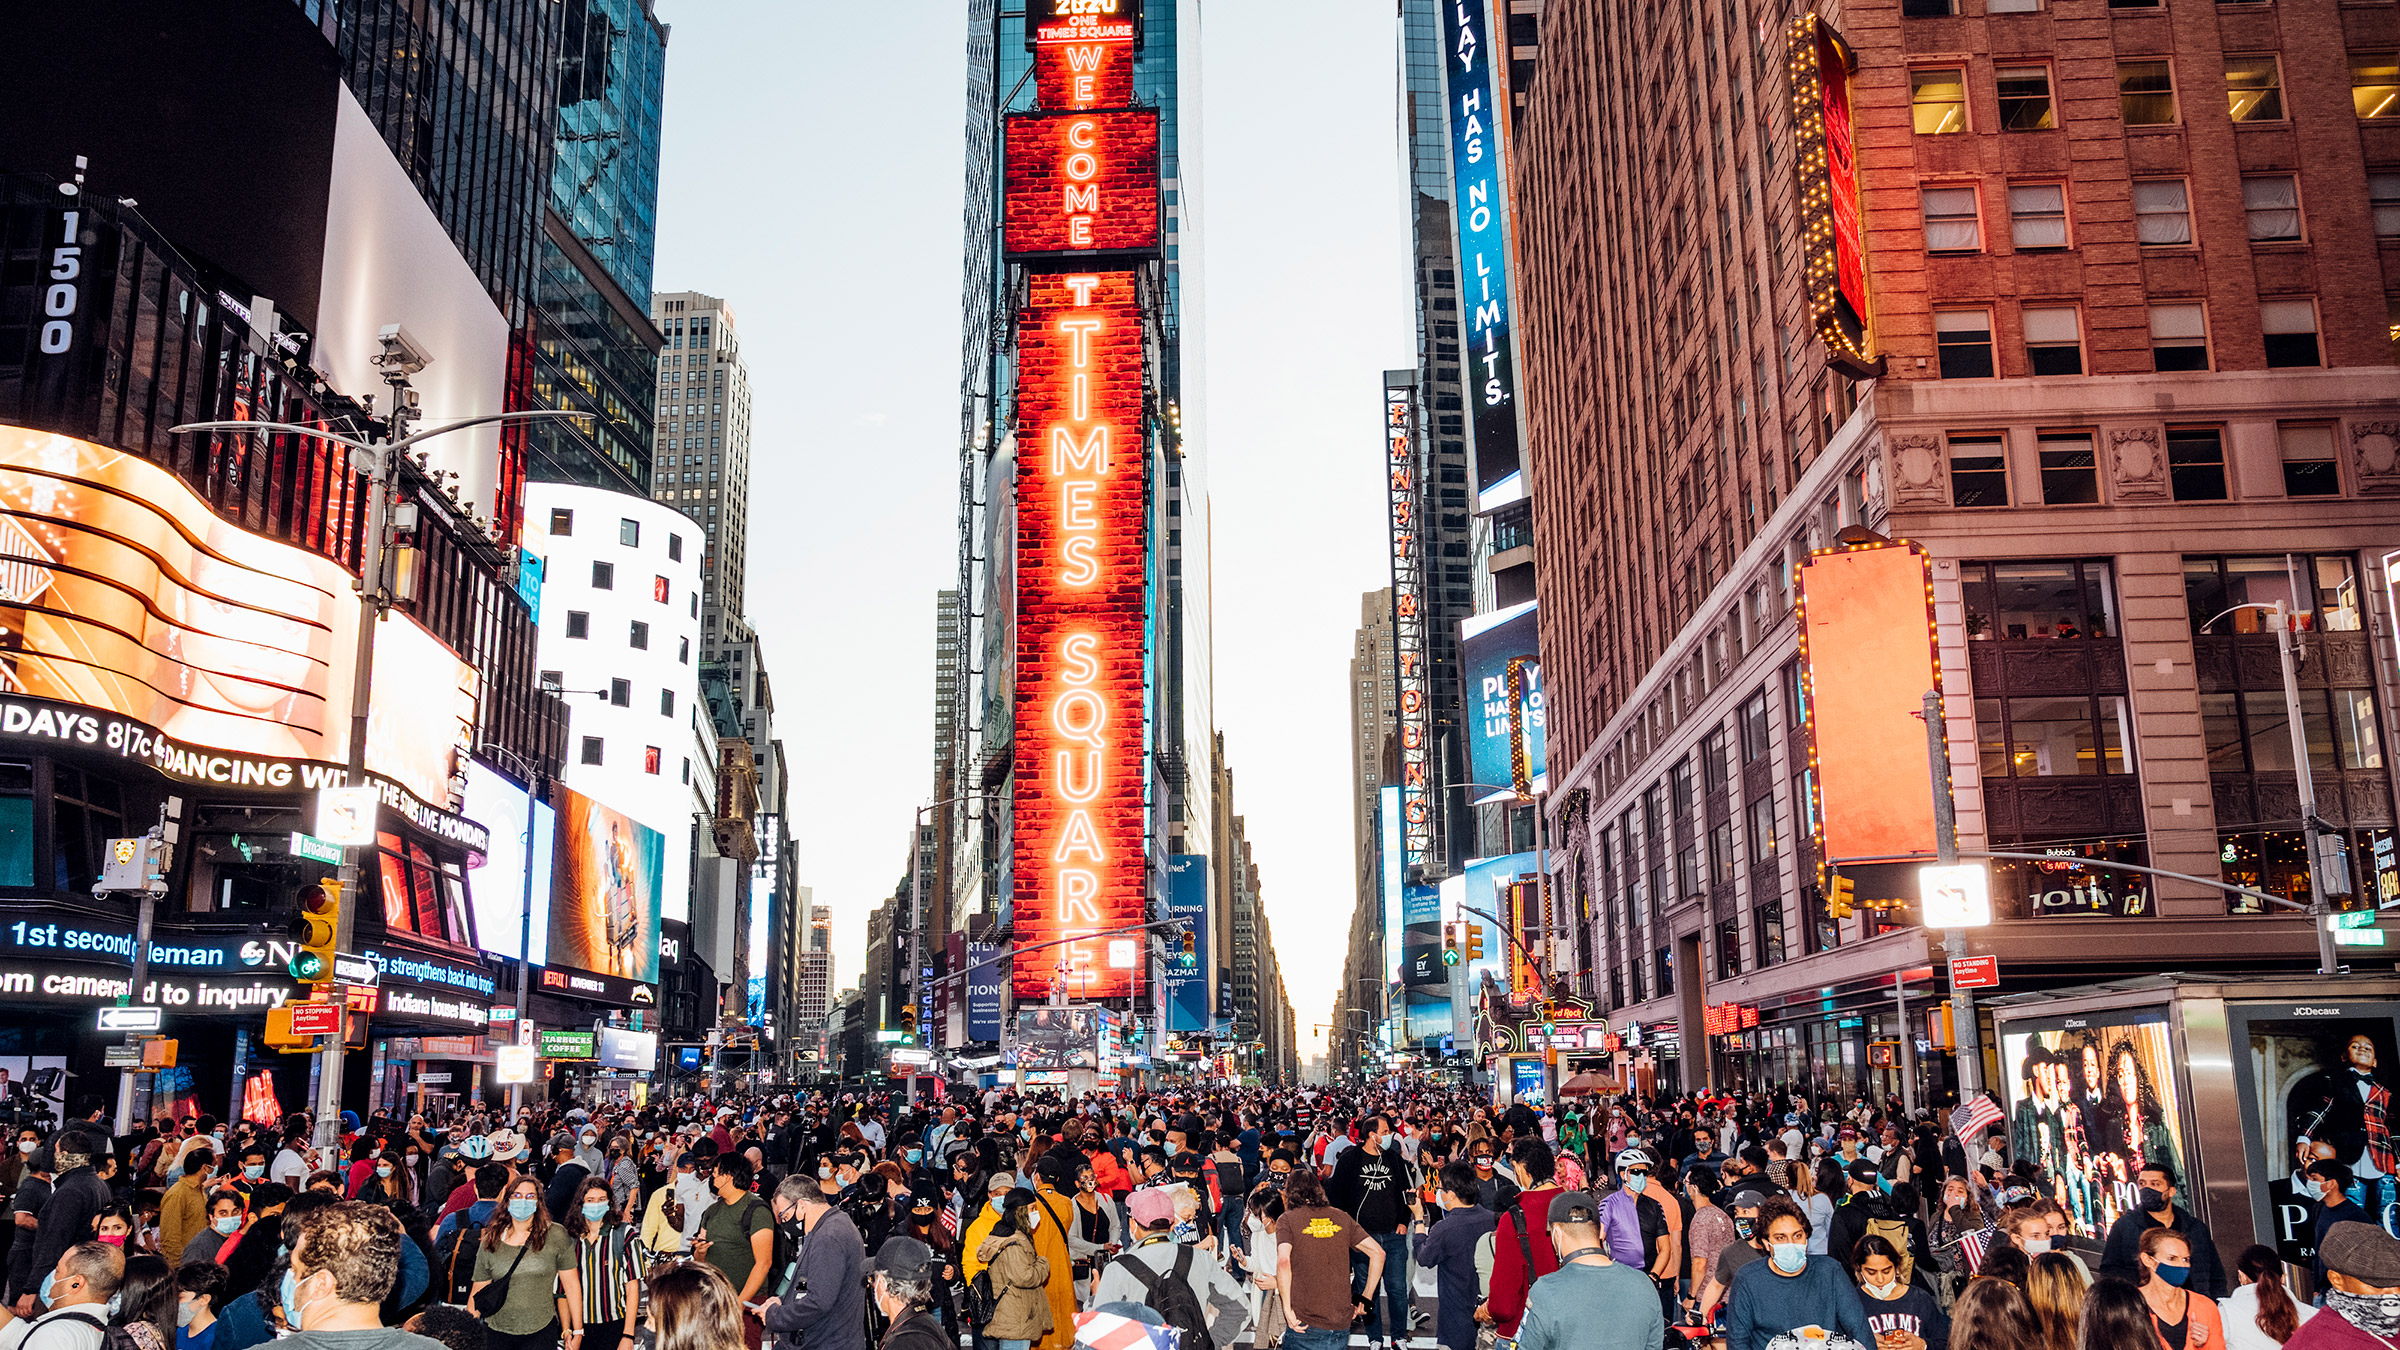 Celebrations around New York City on Nov. 7, 2020, after news organizations projected Joe Biden defeated Donald Trump in the presidential election. Among the locations: Times Square, Columbus Circle and Washington Square Park.